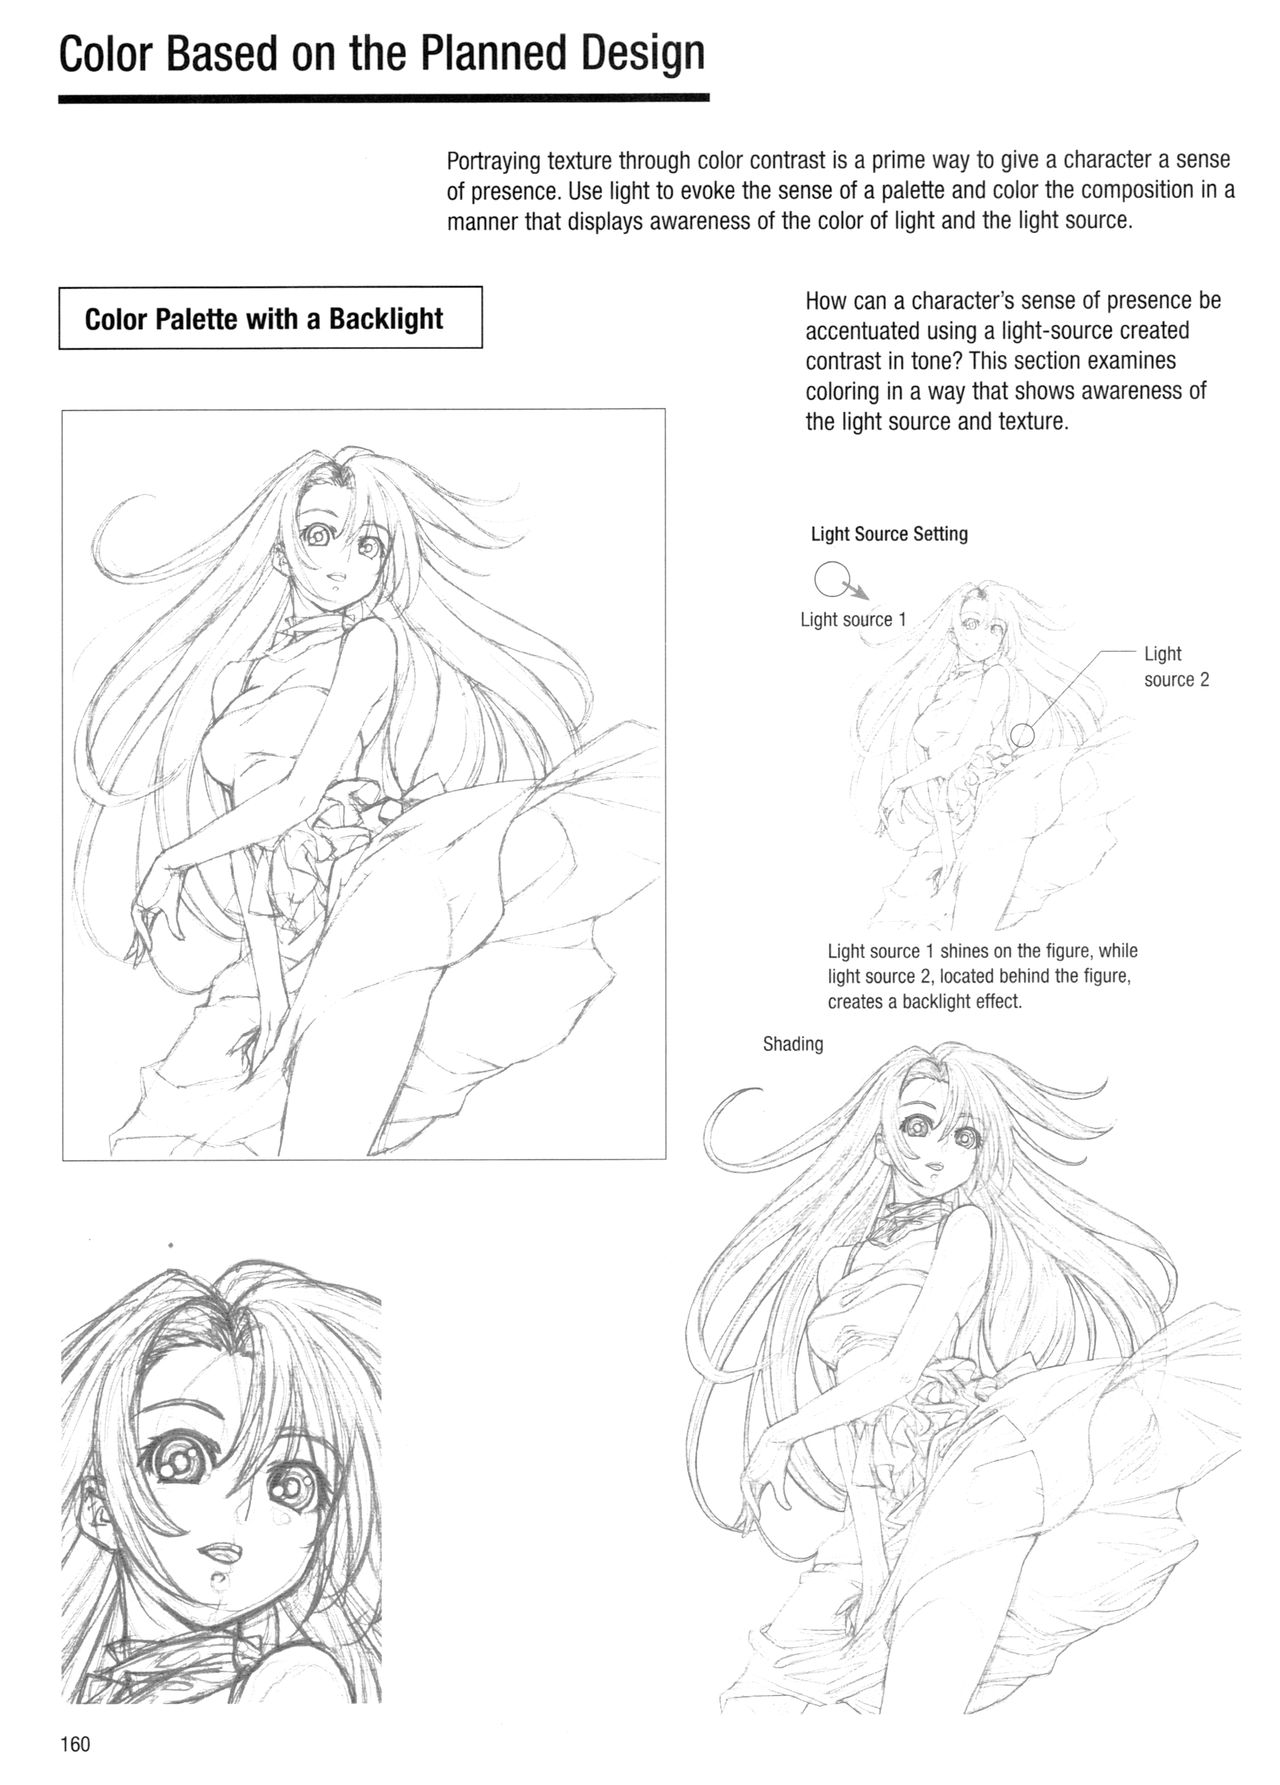 Sketching Manga-Style Vol. 3 - Unforgettable Characters 159